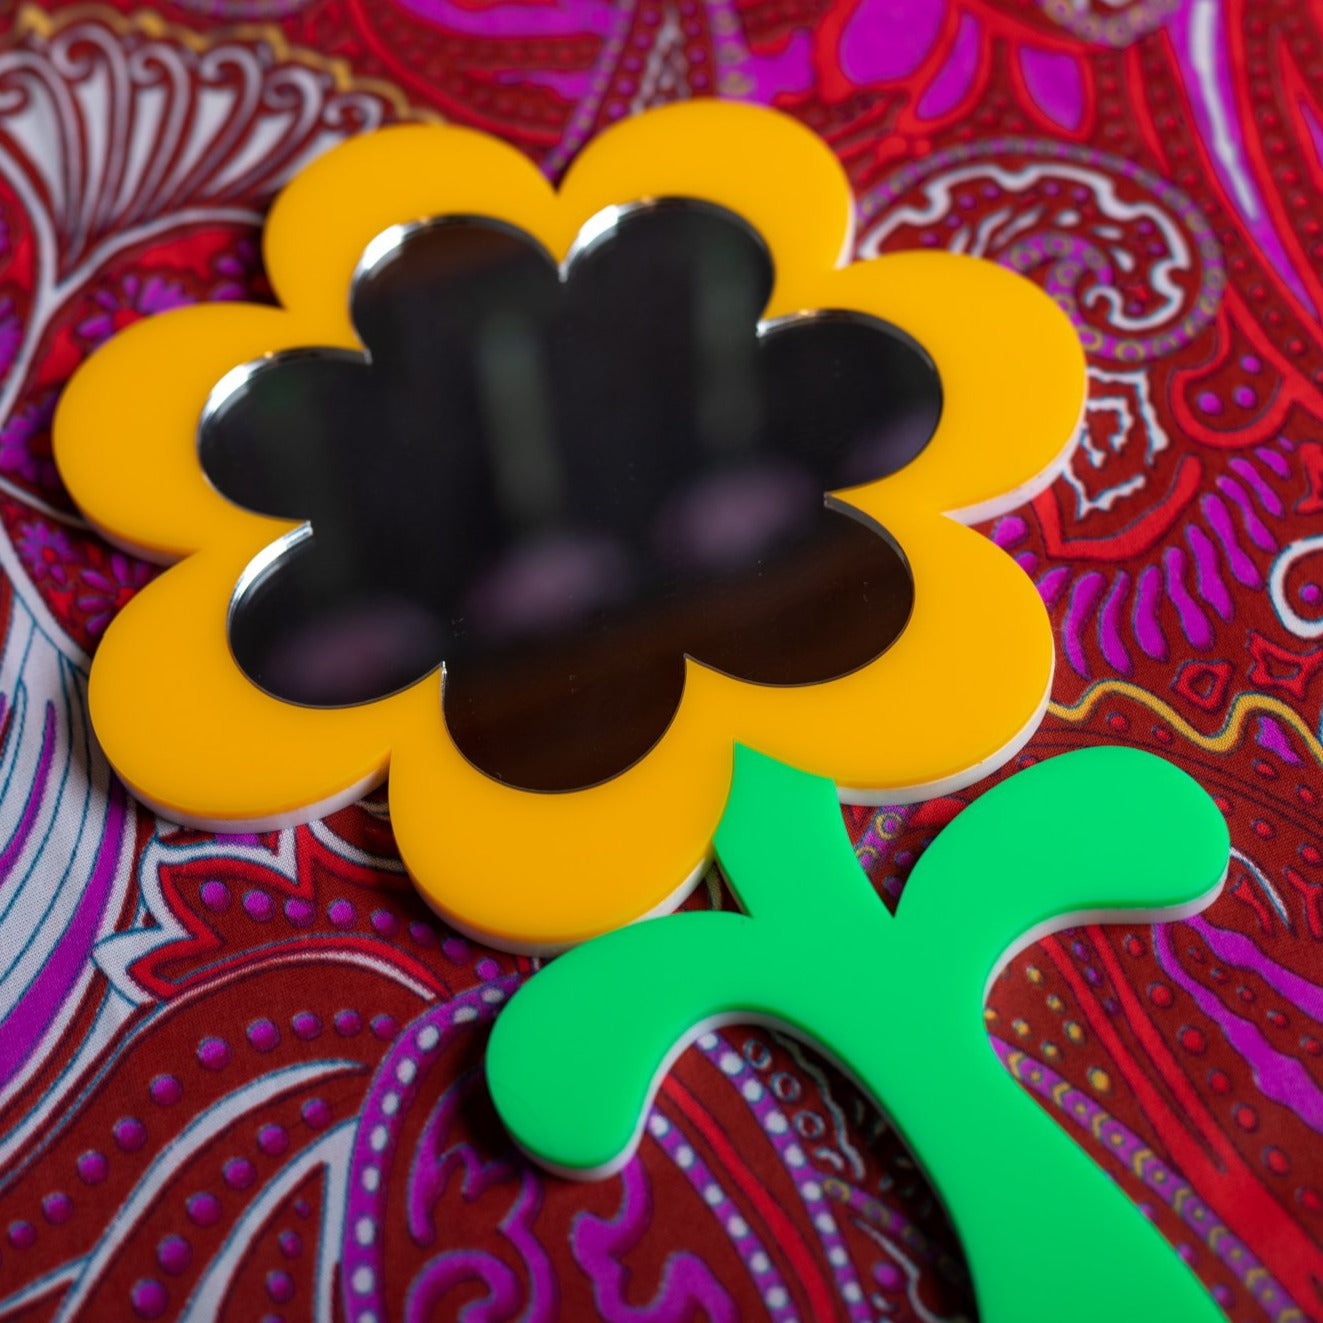 Close up of the new MindFlowers handheld mirror. The handle is a bright green color, shaped like a flower stem. The main mirror is shaped as a daisy with an outer shape featuring a bright canary color.